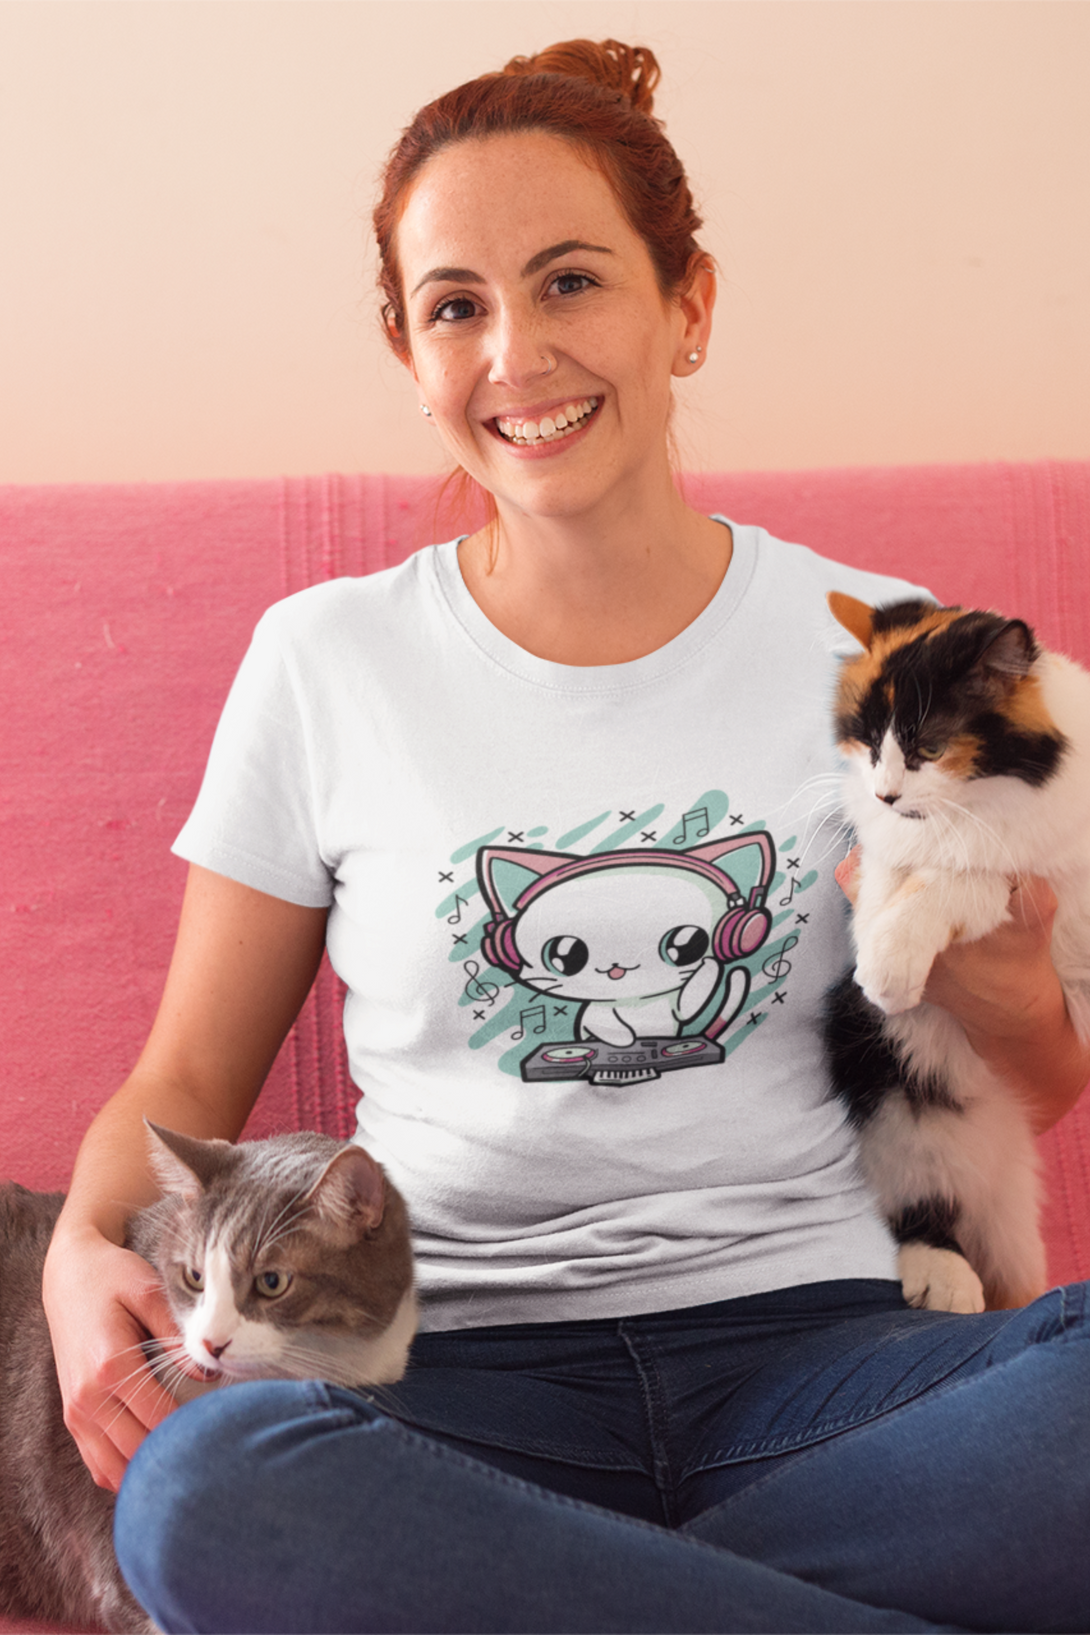 Meow Mix Printed T-Shirt For Women - WowWaves - 6